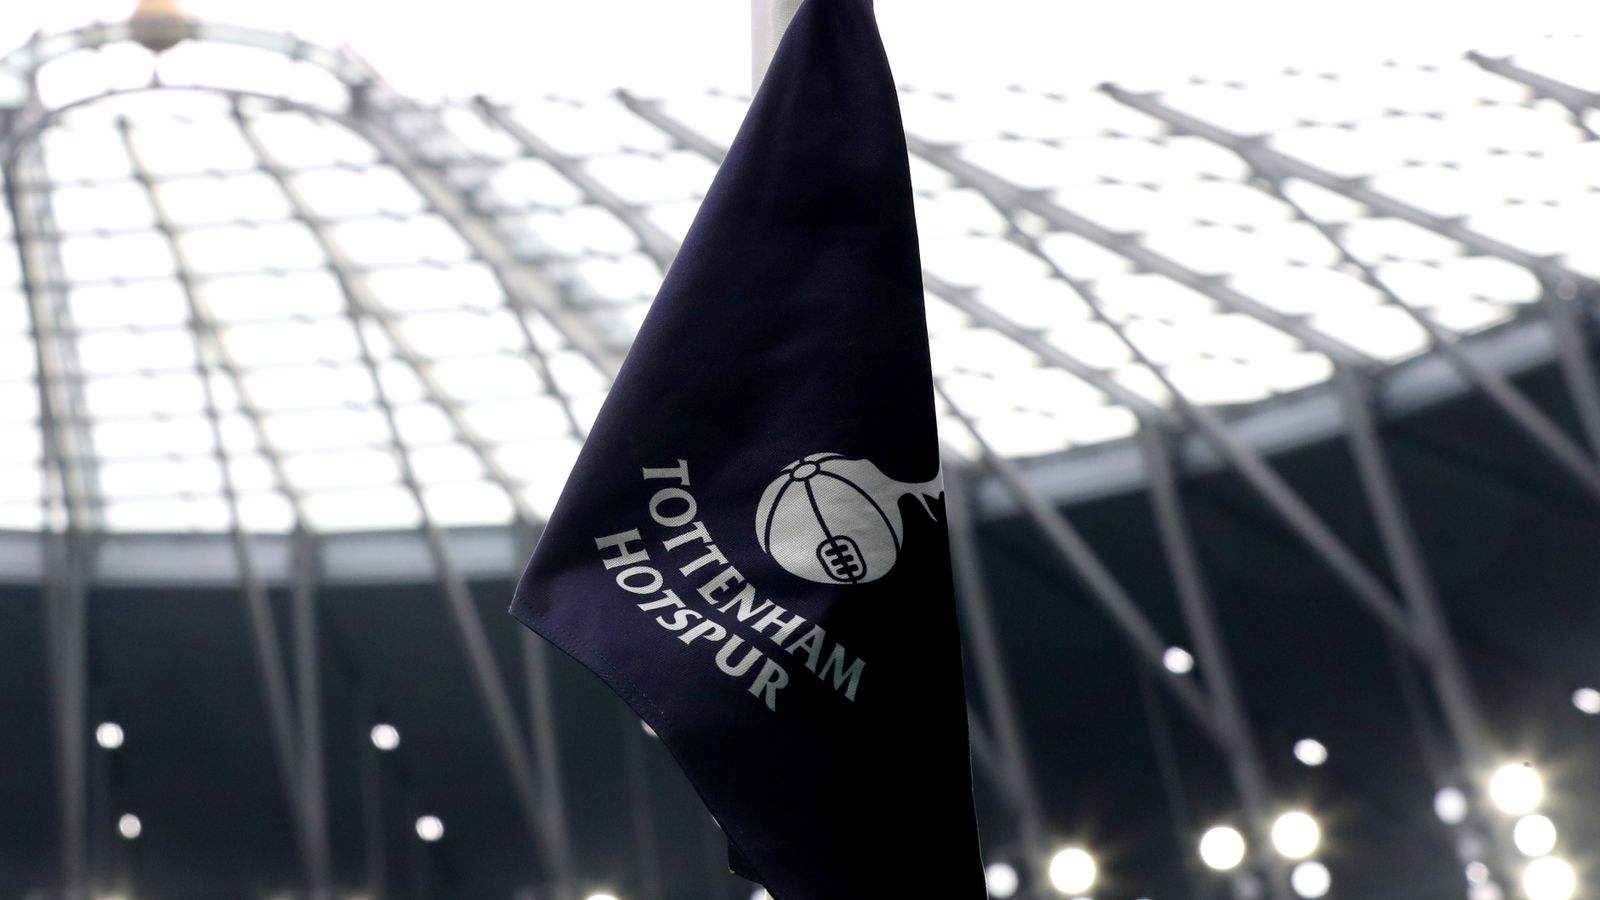 Tottenham hit by Covid-19 outbreak ahead of Europa Conference League clash with Rennes